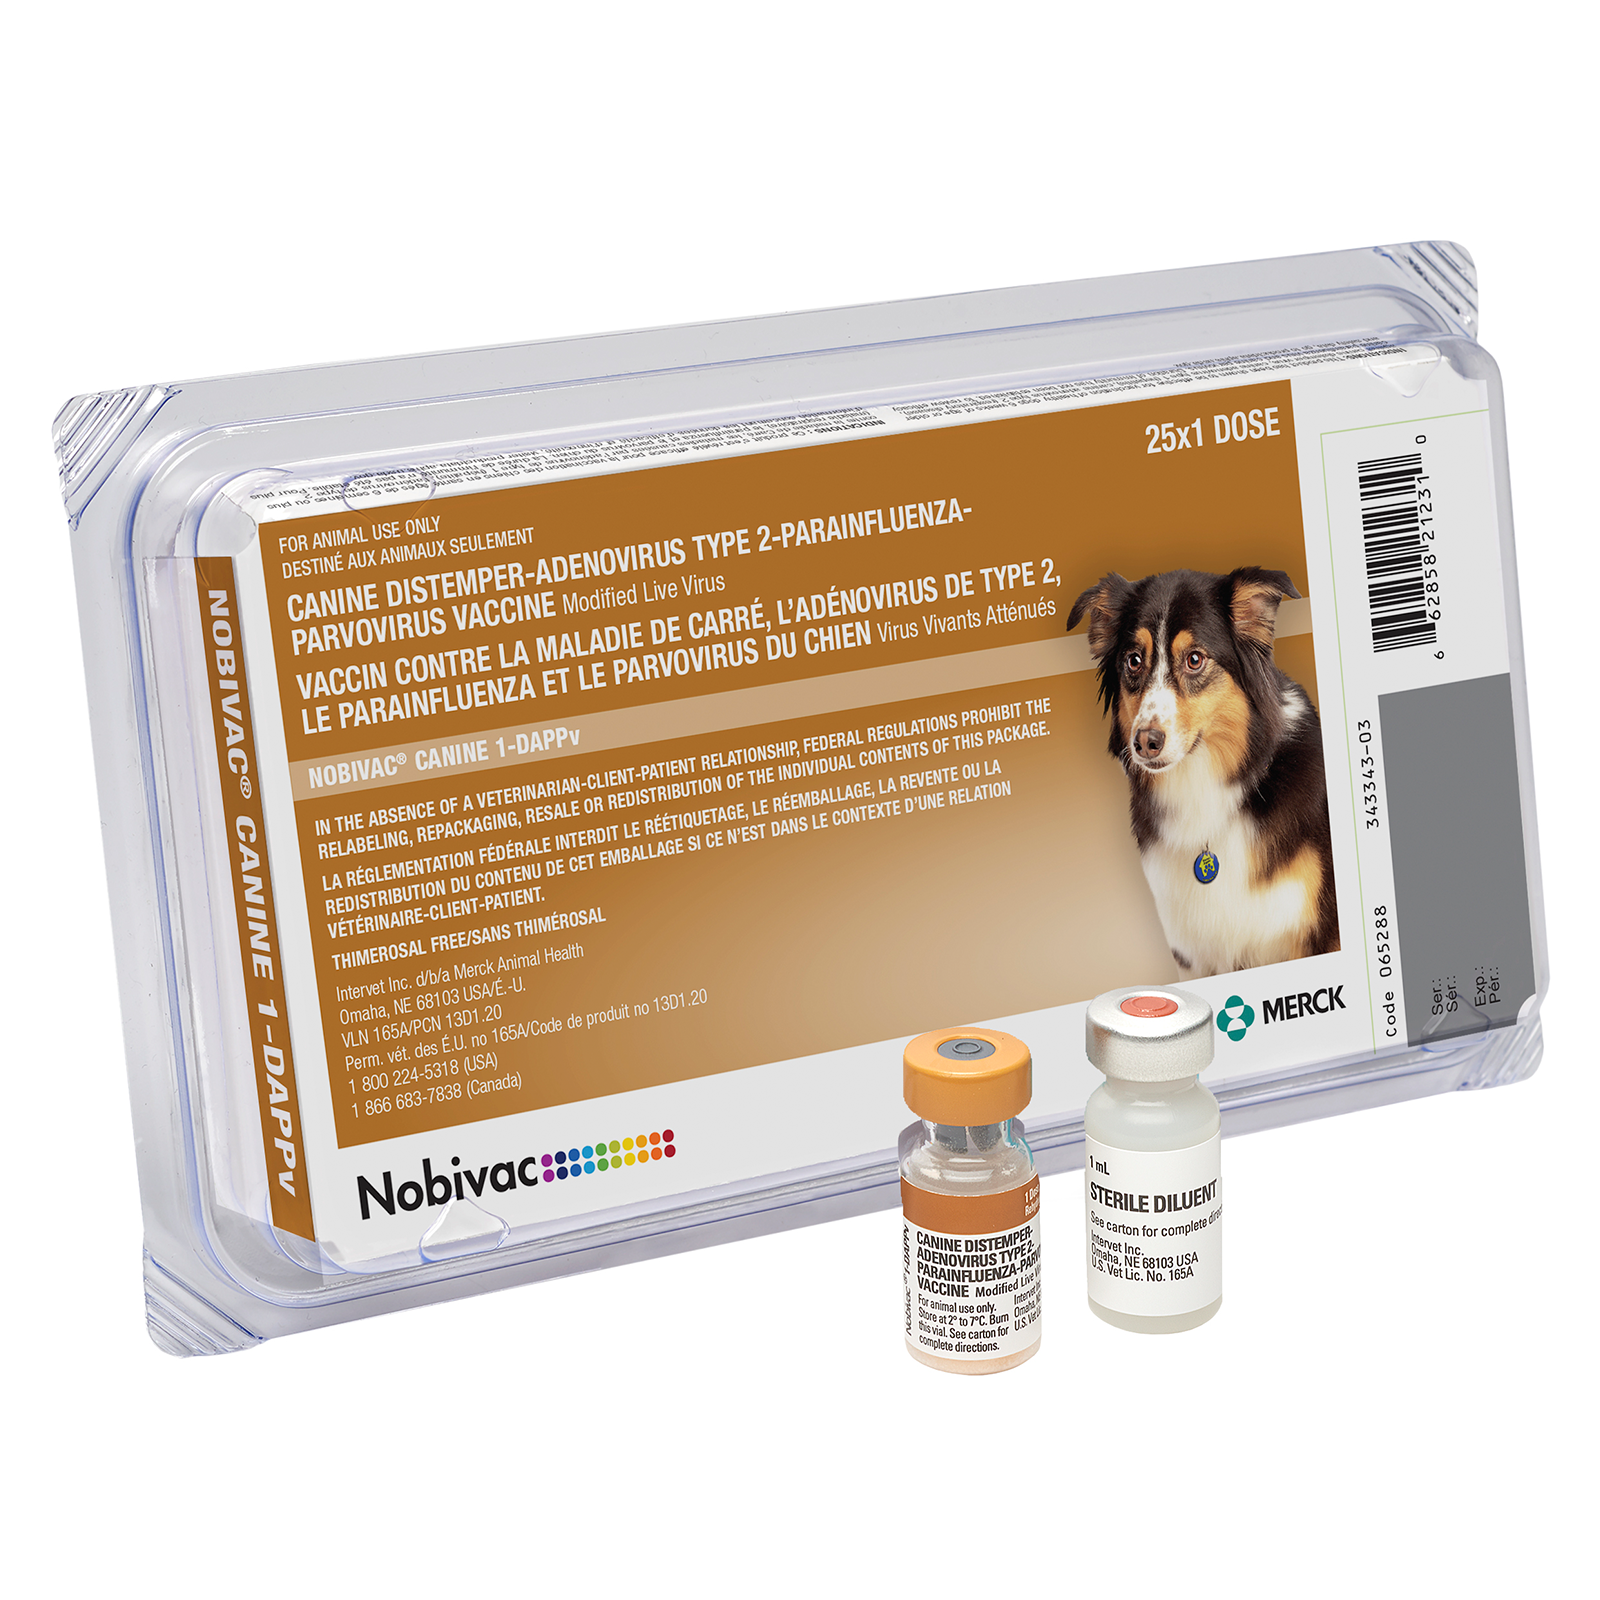 https://www.merck-animal-health-usa.com/wp-content/uploads/sites/54/2021/01/Nobivac-CANINE-1-DAPPv-w-vial-product-image-1600x1600-1.png